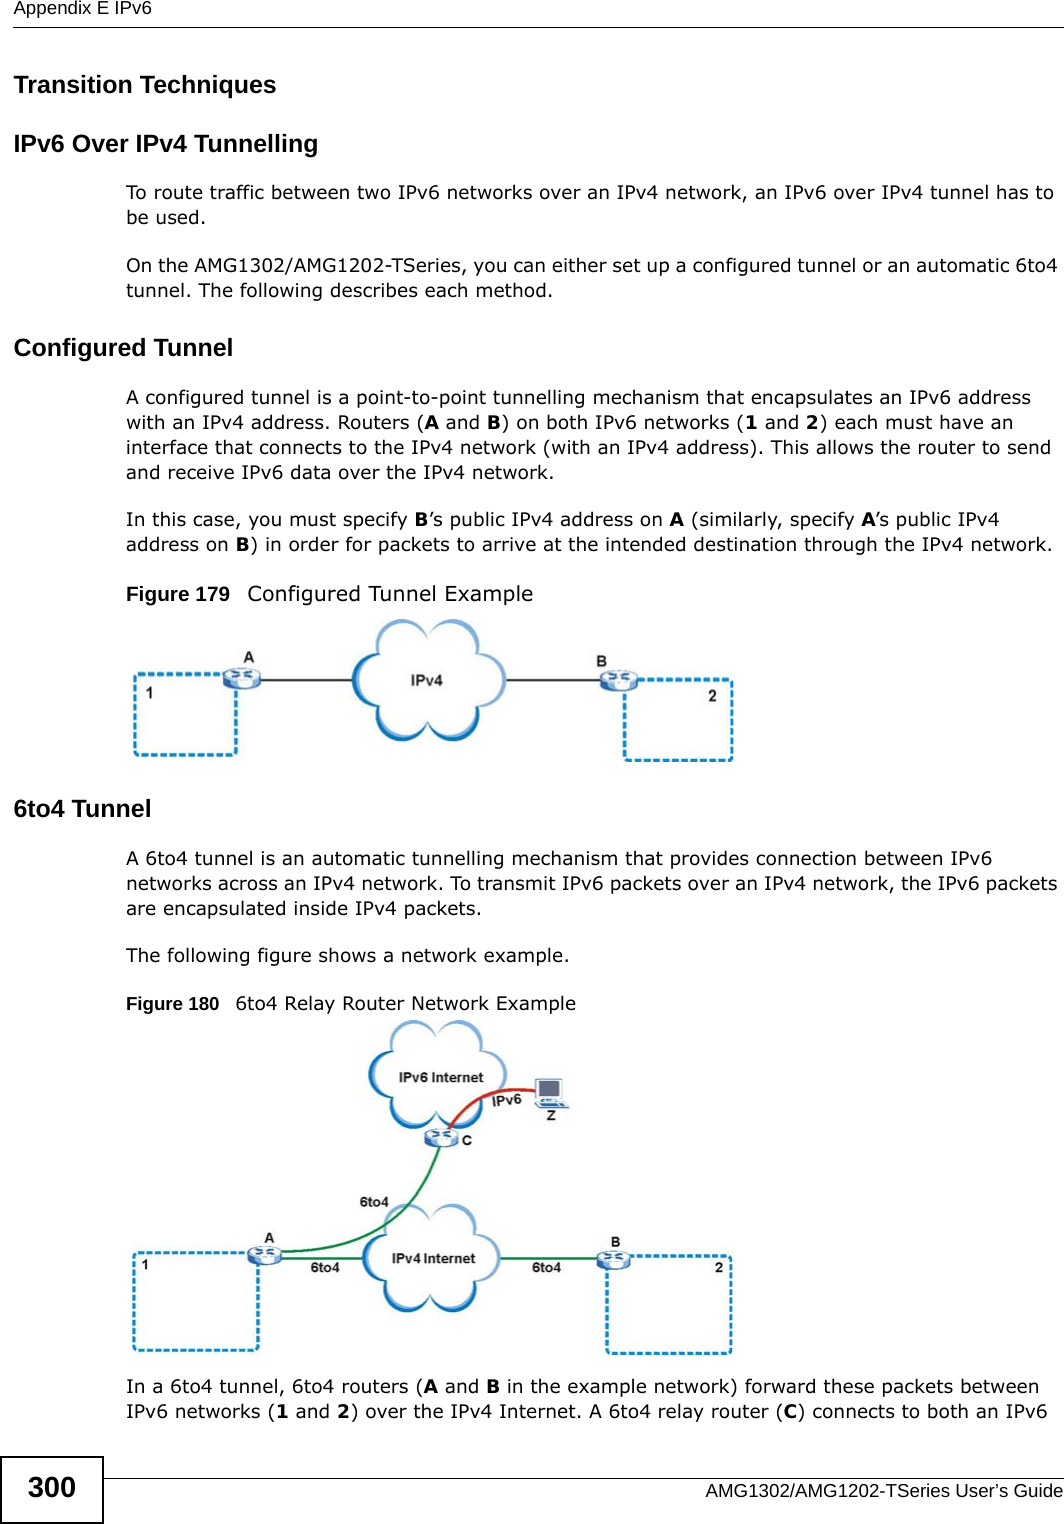 Appendix E IPv6AMG1302/AMG1202-TSeries User’s Guide300Transition TechniquesIPv6 Over IPv4 TunnellingTo route traffic between two IPv6 networks over an IPv4 network, an IPv6 over IPv4 tunnel has to be used. On the AMG1302/AMG1202-TSeries, you can either set up a configured tunnel or an automatic 6to4 tunnel. The following describes each method.  Configured TunnelA configured tunnel is a point-to-point tunnelling mechanism that encapsulates an IPv6 address with an IPv4 address. Routers (A and B) on both IPv6 networks (1 and 2) each must have an interface that connects to the IPv4 network (with an IPv4 address). This allows the router to send and receive IPv6 data over the IPv4 network. In this case, you must specify B’s public IPv4 address on A (similarly, specify A’s public IPv4 address on B) in order for packets to arrive at the intended destination through the IPv4 network. Figure 179   Configured Tunnel Example  6to4 TunnelA 6to4 tunnel is an automatic tunnelling mechanism that provides connection between IPv6 networks across an IPv4 network. To transmit IPv6 packets over an IPv4 network, the IPv6 packets are encapsulated inside IPv4 packets. The following figure shows a network example. Figure 180   6to4 Relay Router Network Example In a 6to4 tunnel, 6to4 routers (A and B in the example network) forward these packets between IPv6 networks (1 and 2) over the IPv4 Internet. A 6to4 relay router (C) connects to both an IPv6 